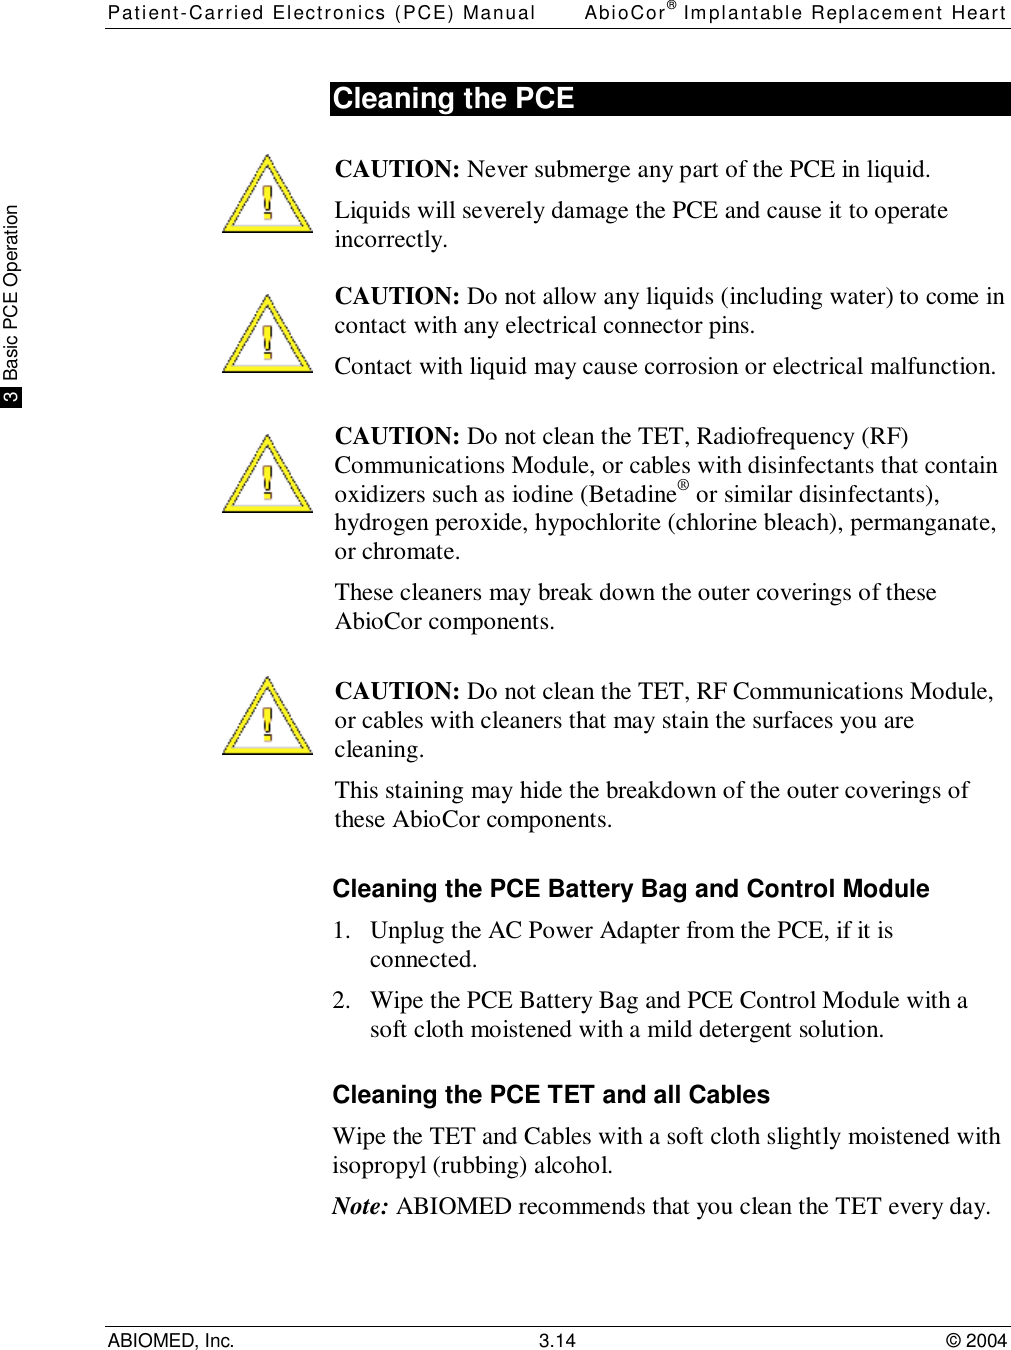 Patient-Carried Electronics (PCE) Manual AbioCor® Implantable Replacement HeartABIOMED, Inc. 3.14 © 2004 3  Basic PCE OperationCleaning the PCECAUTION: Never submerge any part of the PCE in liquid.Liquids will severely damage the PCE and cause it to operateincorrectly.  CAUTION: Do not allow any liquids (including water) to come incontact with any electrical connector pins.Contact with liquid may cause corrosion or electrical malfunction.CAUTION: Do not clean the TET, Radiofrequency (RF)Communications Module, or cables with disinfectants that containoxidizers such as iodine (Betadine® or similar disinfectants),hydrogen peroxide, hypochlorite (chlorine bleach), permanganate,or chromate.These cleaners may break down the outer coverings of theseAbioCor components.CAUTION: Do not clean the TET, RF Communications Module,or cables with cleaners that may stain the surfaces you arecleaning.This staining may hide the breakdown of the outer coverings ofthese AbioCor components.Cleaning the PCE Battery Bag and Control Module1. Unplug the AC Power Adapter from the PCE, if it isconnected.2. Wipe the PCE Battery Bag and PCE Control Module with asoft cloth moistened with a mild detergent solution.Cleaning the PCE TET and all CablesWipe the TET and Cables with a soft cloth slightly moistened withisopropyl (rubbing) alcohol.Note: ABIOMED recommends that you clean the TET every day.